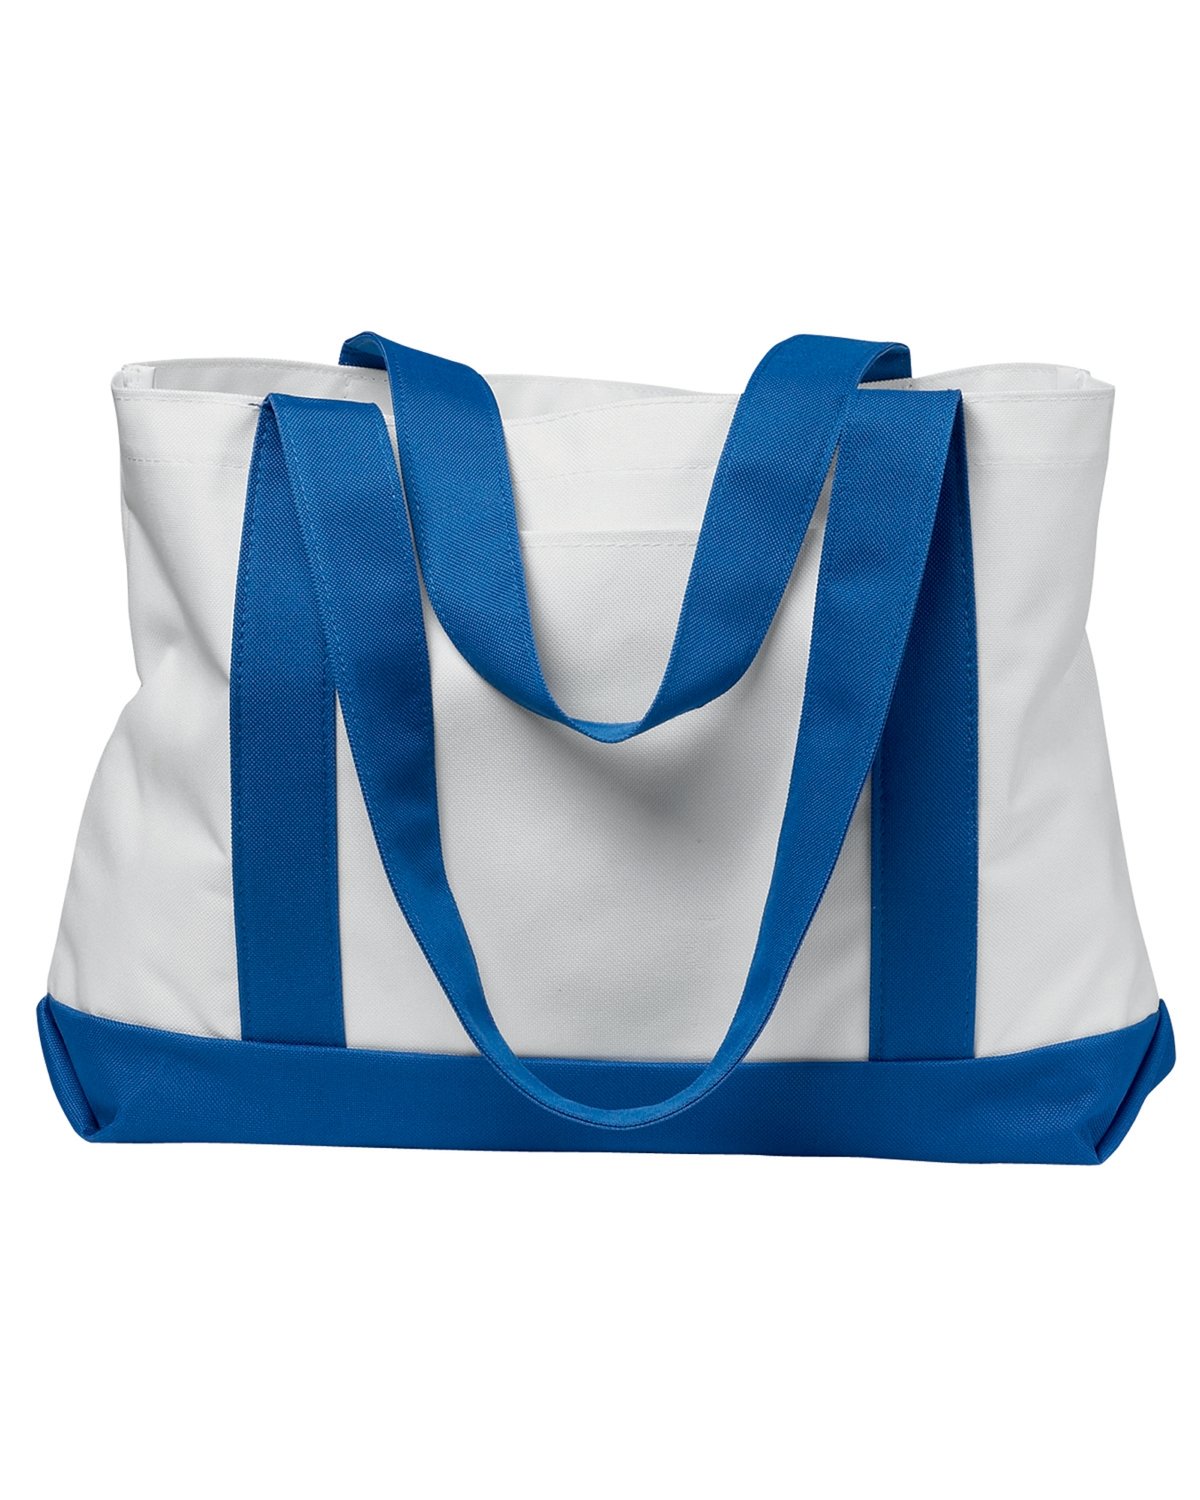 Bags and Accessories WHITE/ ROYAL OS Liberty Bags